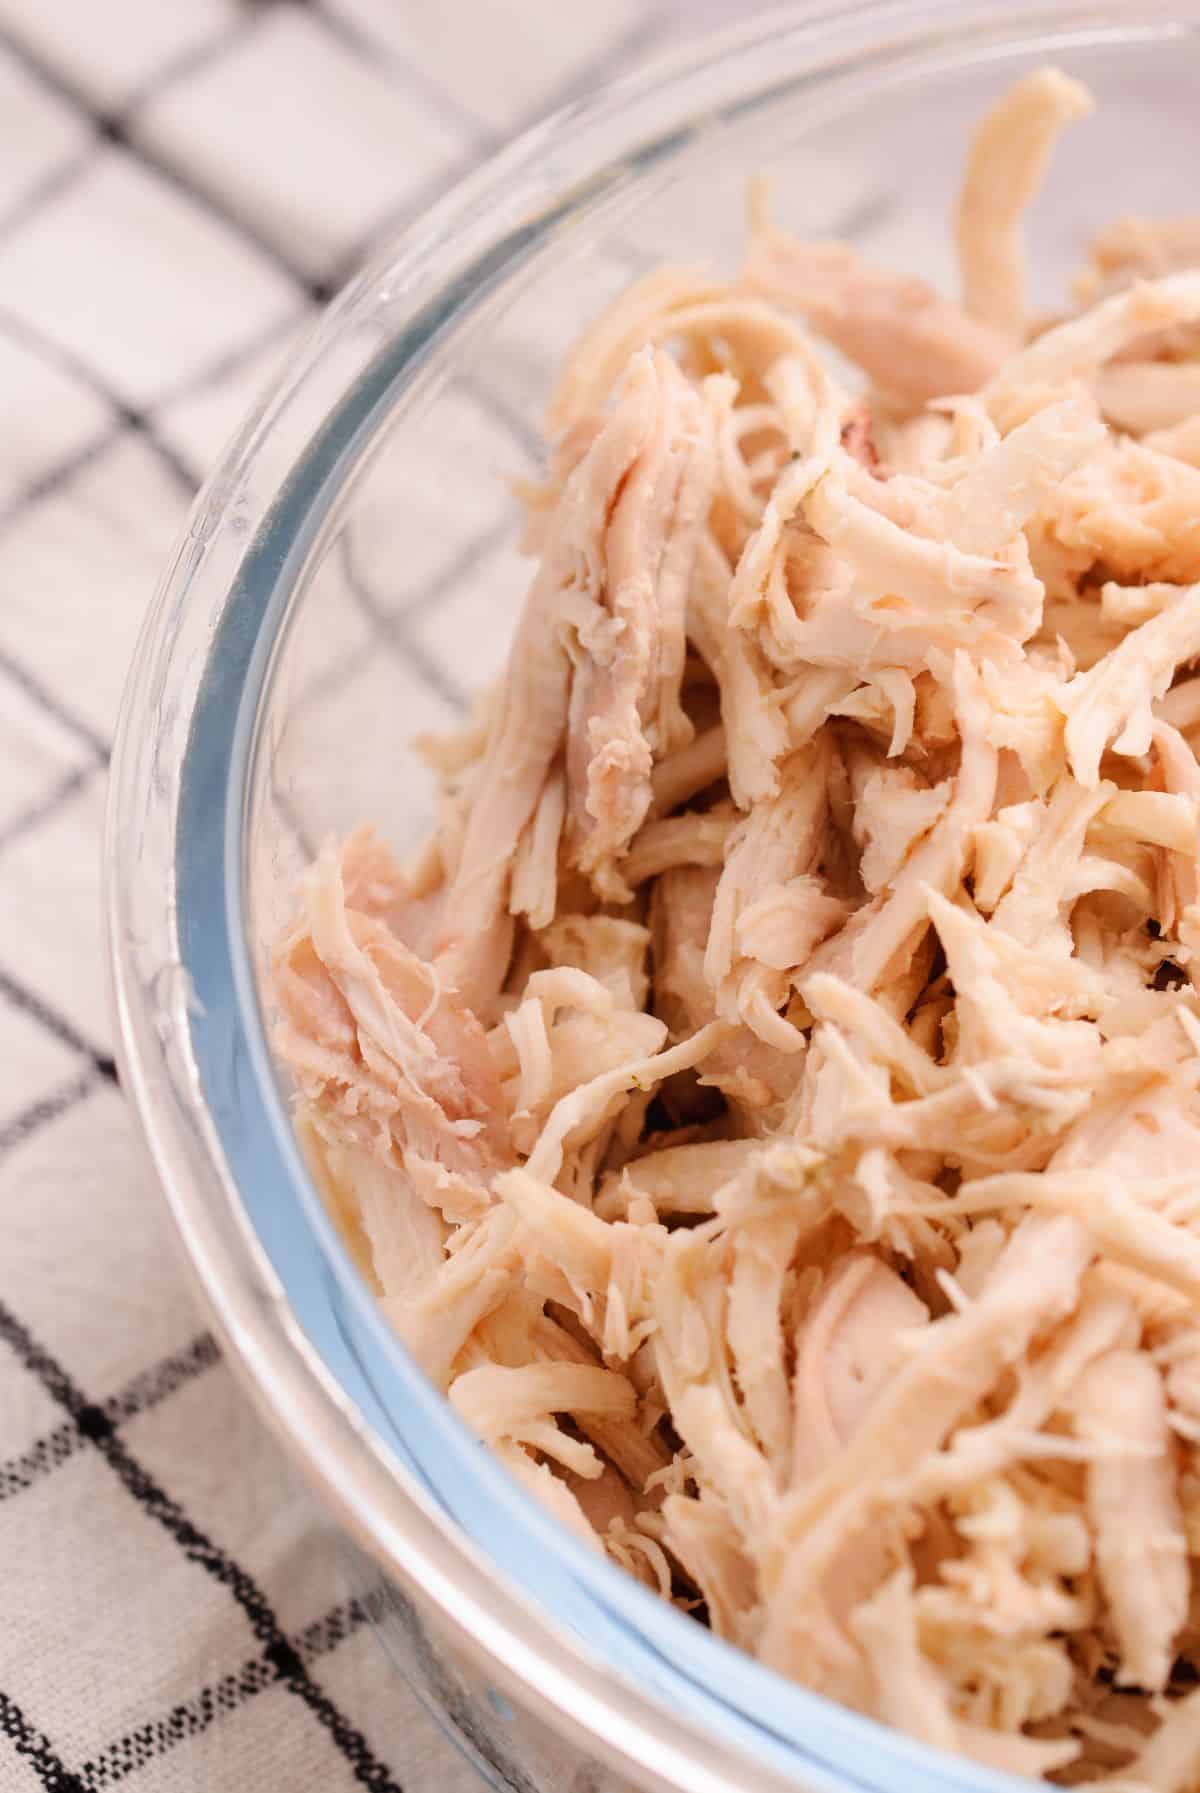 Shredded Chicken Made In The Slow Cooker Step 11